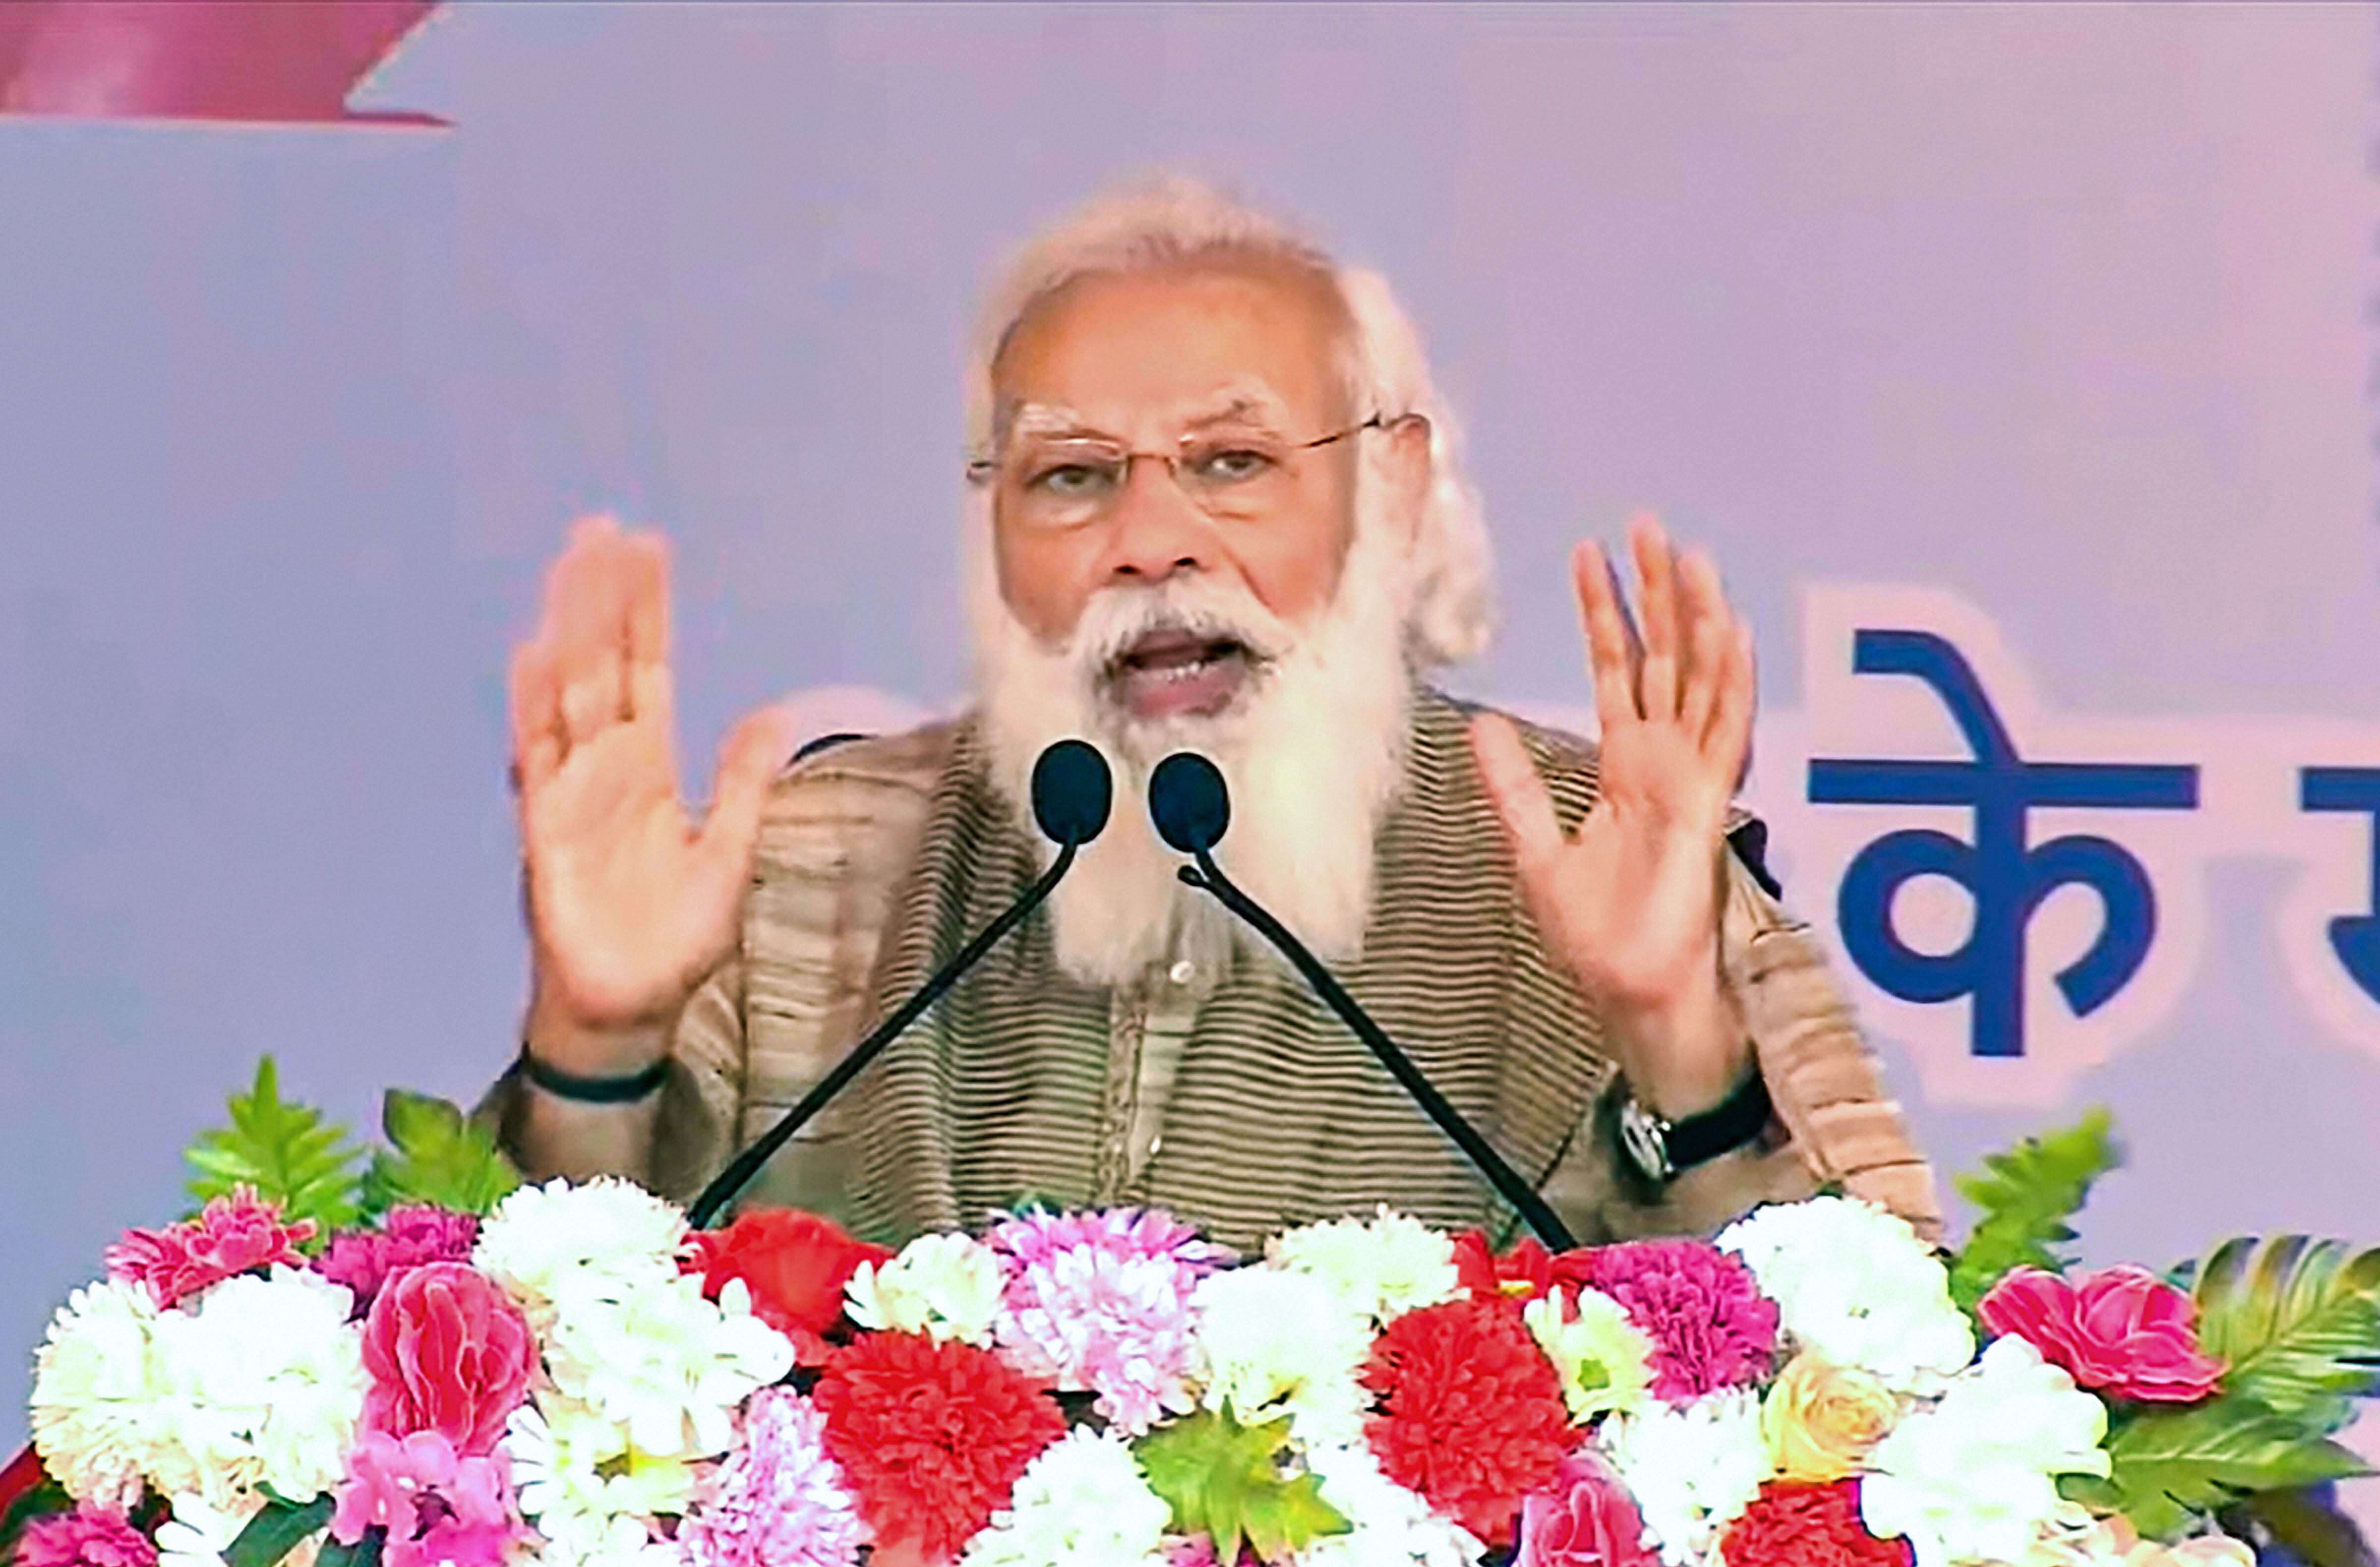 Budget focusing on making agriculture modern, smart: PM